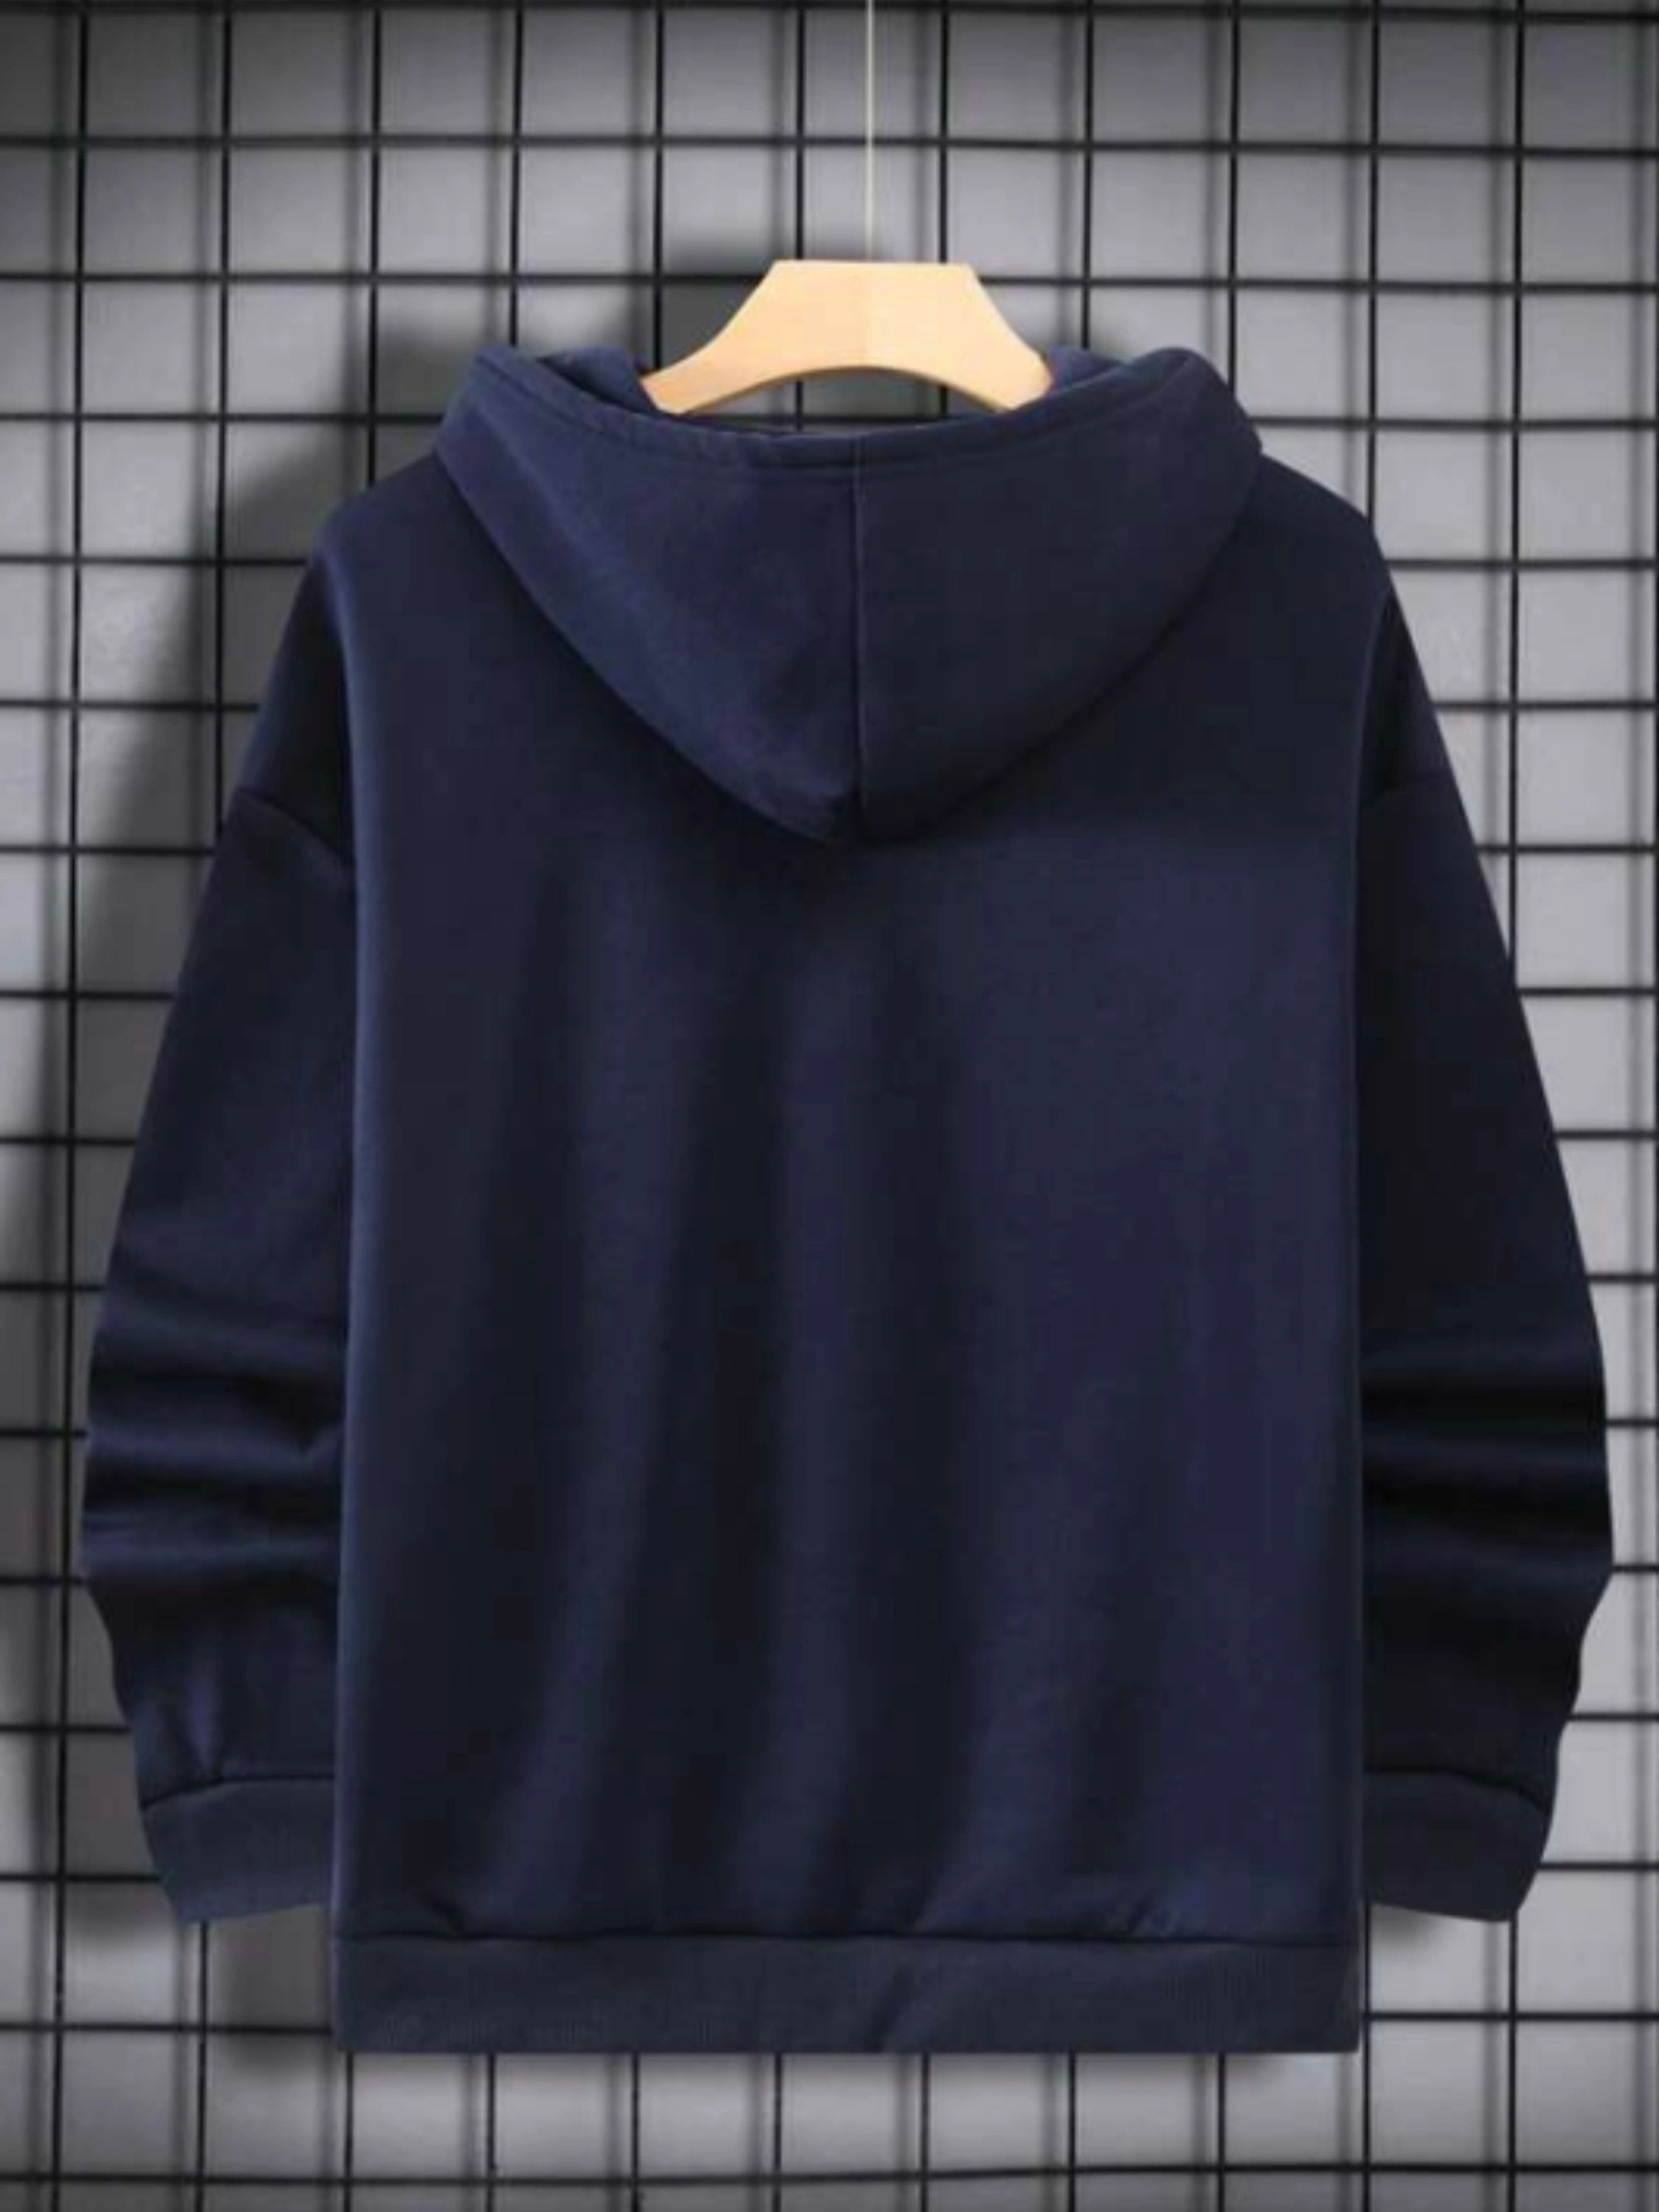 solid color hoodies, solid color hoodies for men graphic hoodie with kangaroo pocket comfy loose drawstring trendy hooded pullover mens clothing for autumn winter details 8